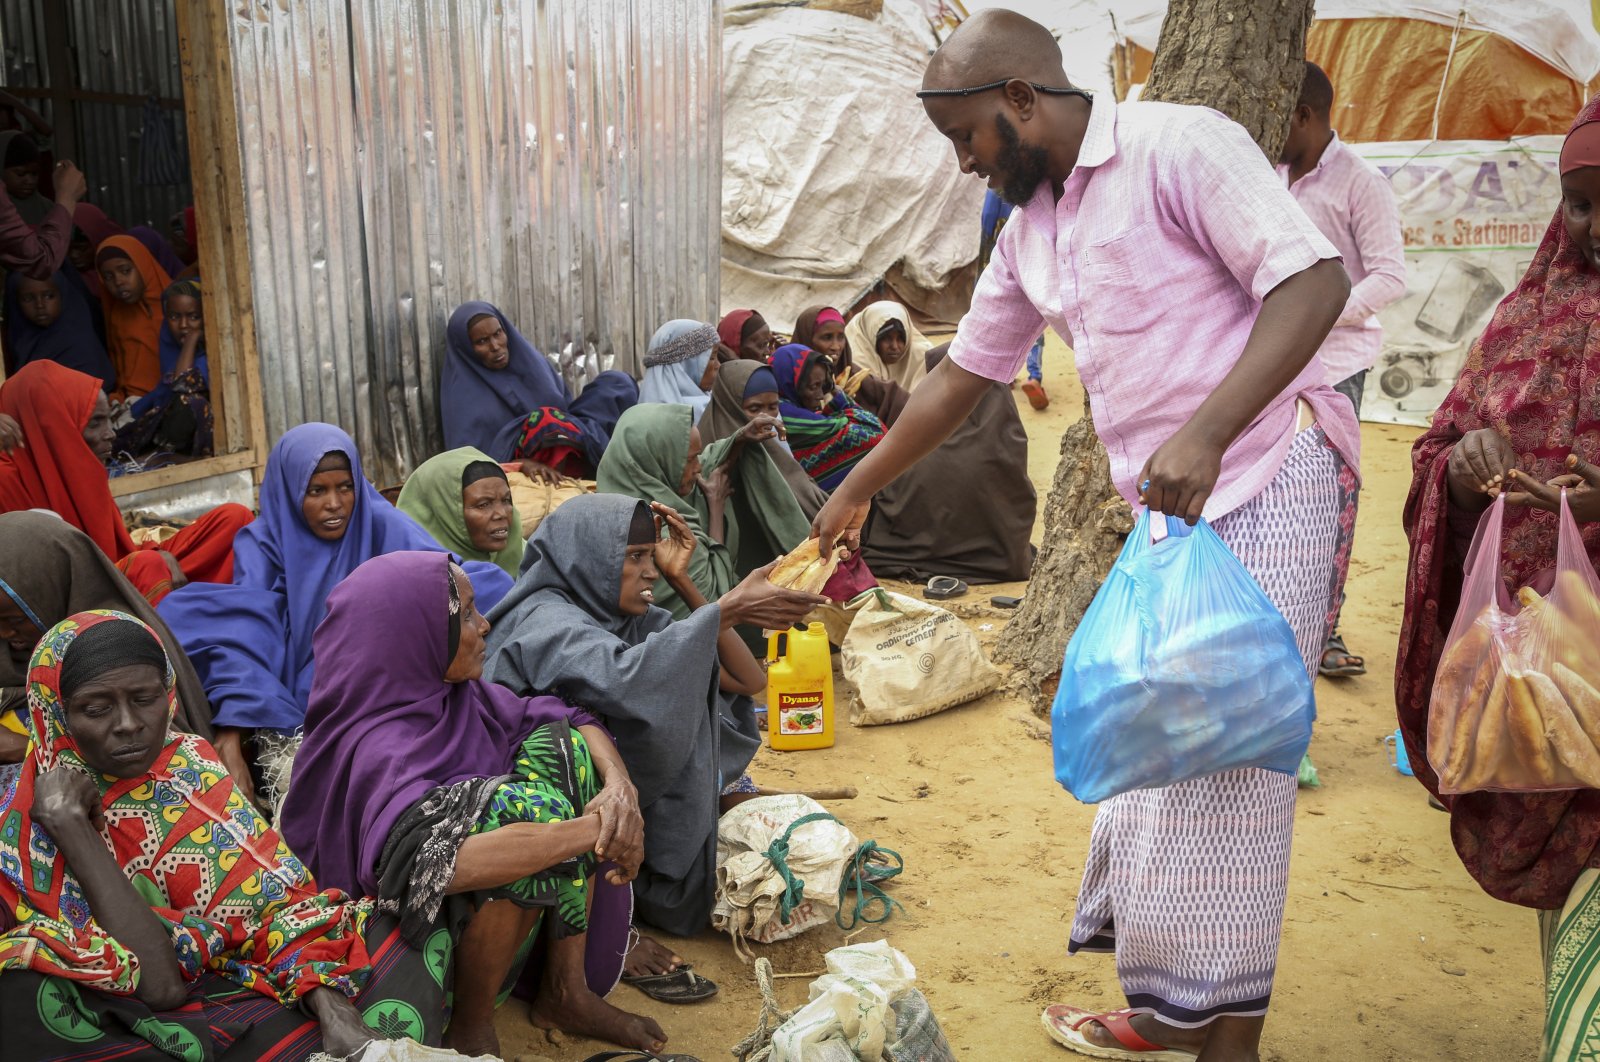 Somalis who fled drought-stricken areas receive charitable food donations from city residents after arriving at a makeshift camp for the displaced on the outskirts of Mogadishu, Somalia, June 30, 2022. (AP Photo)